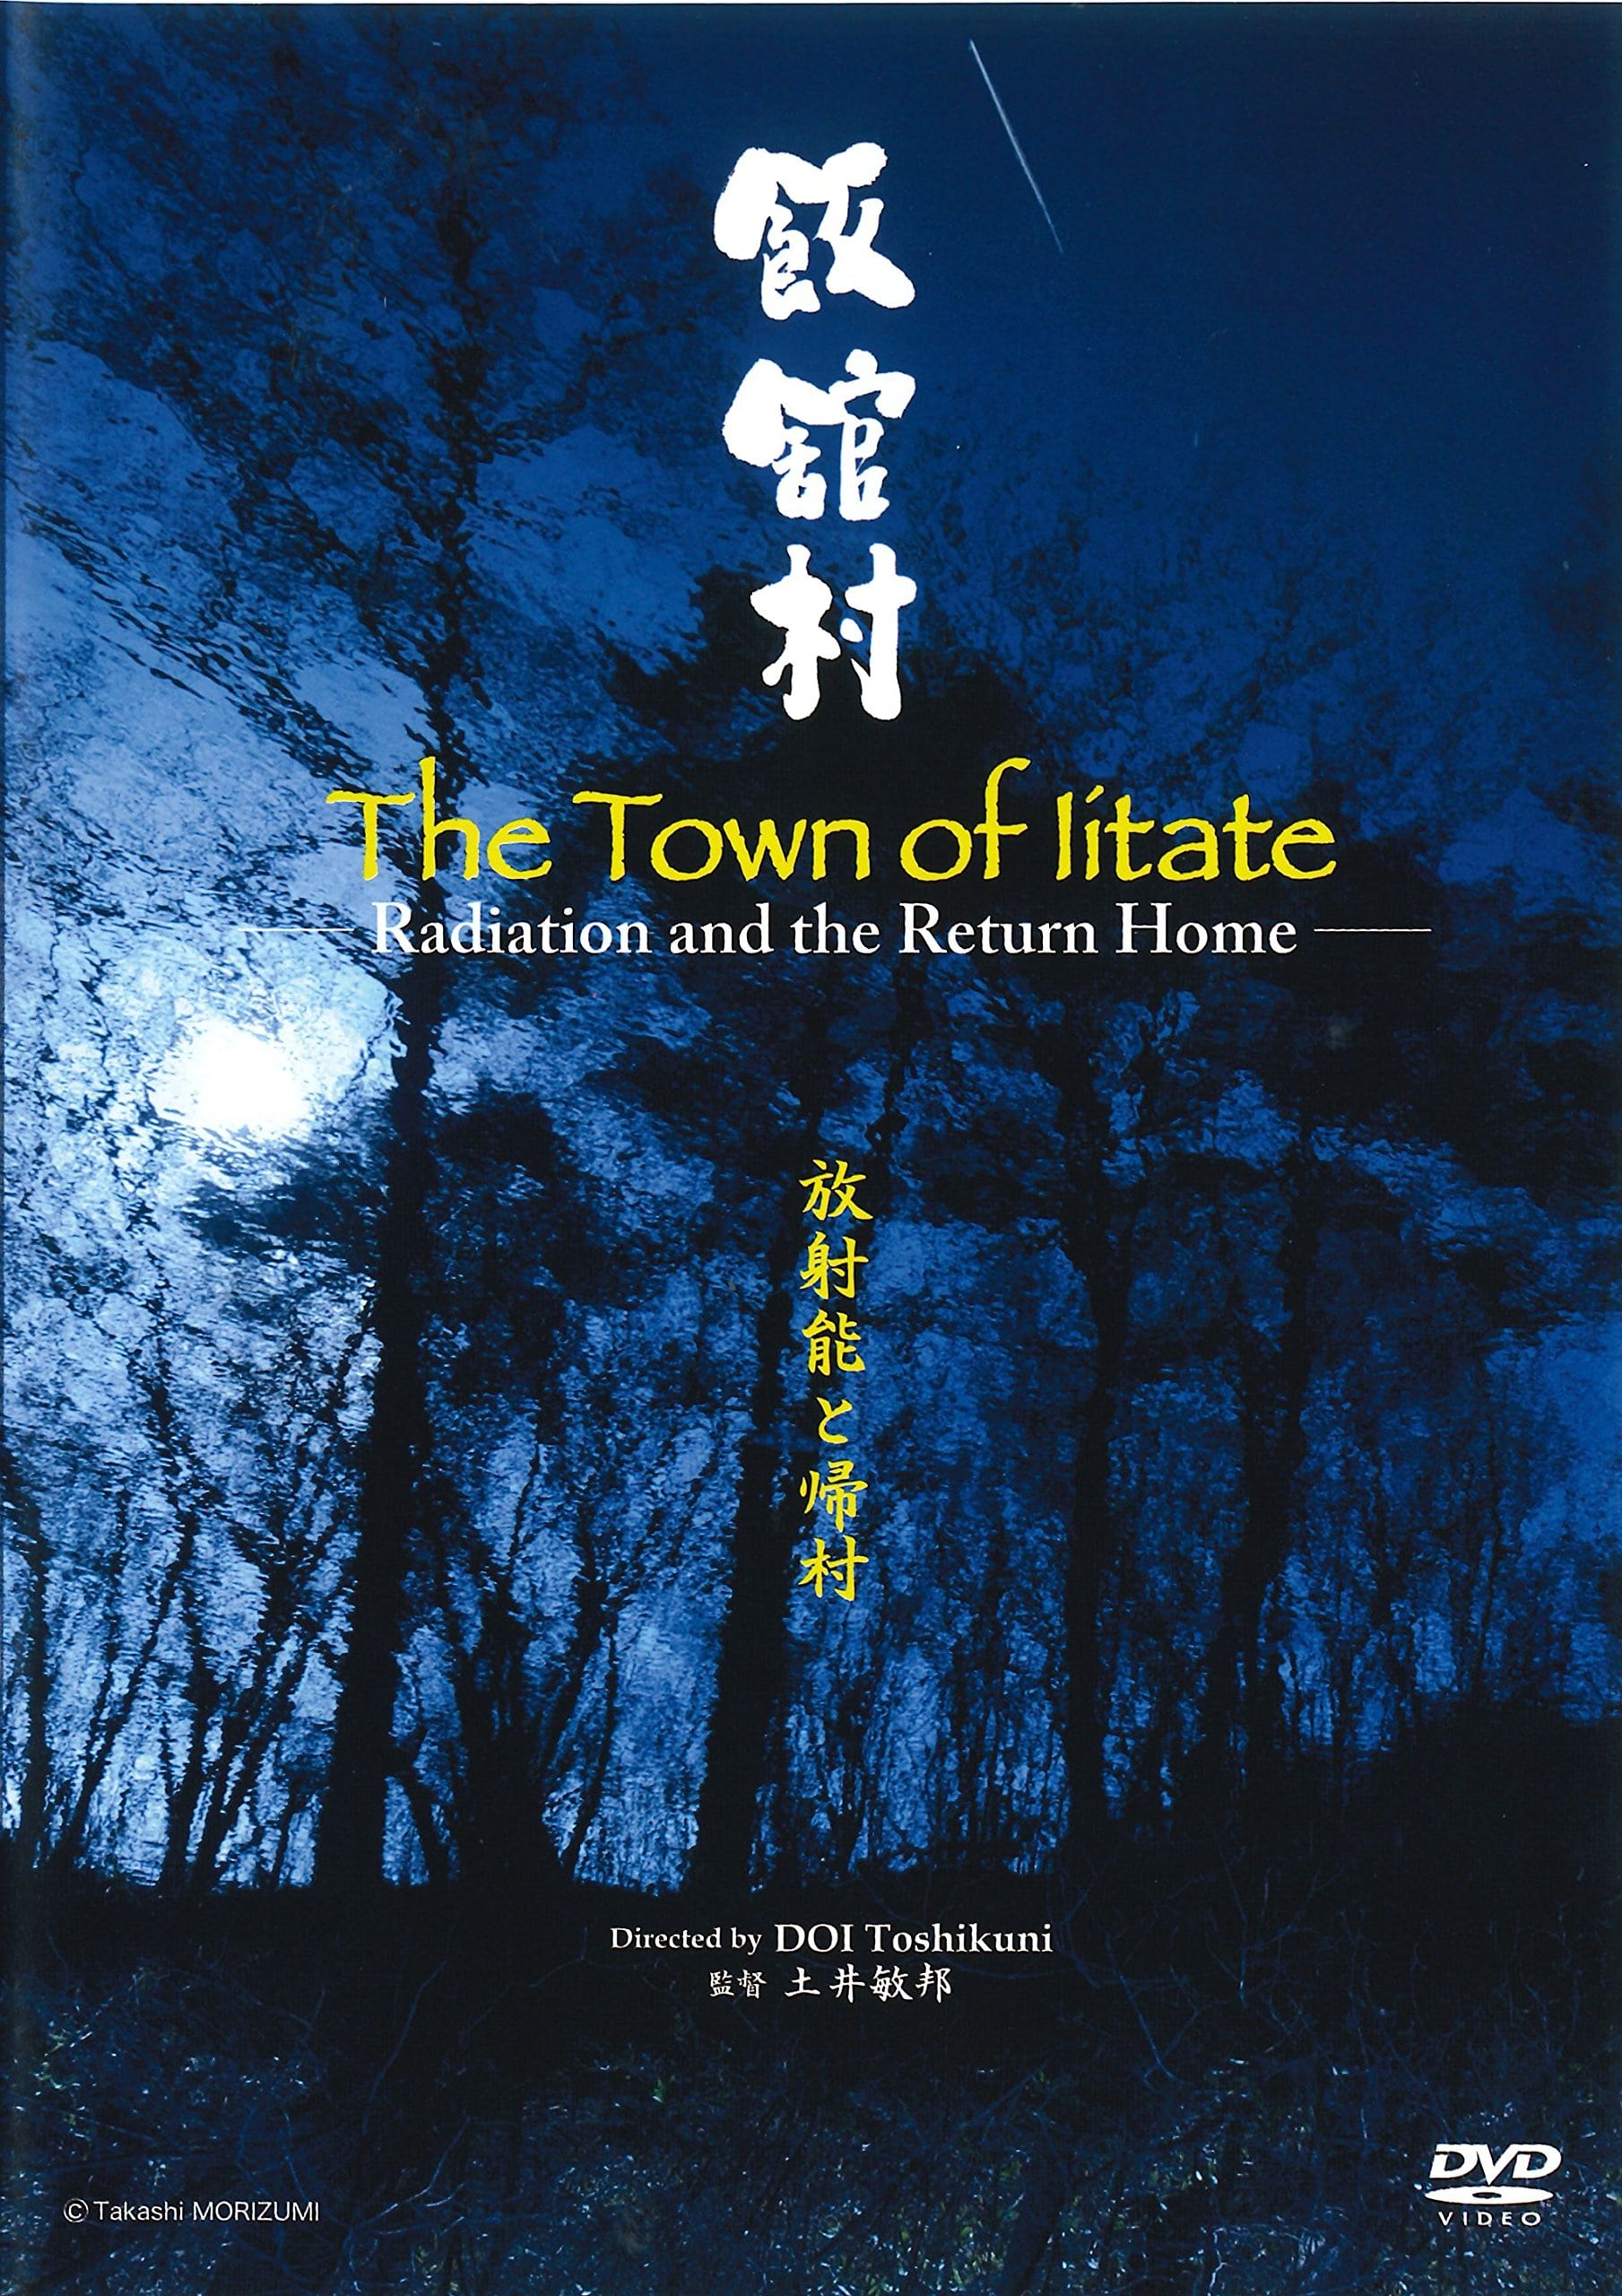 The Town of Iidate: Radiation and the Return Home